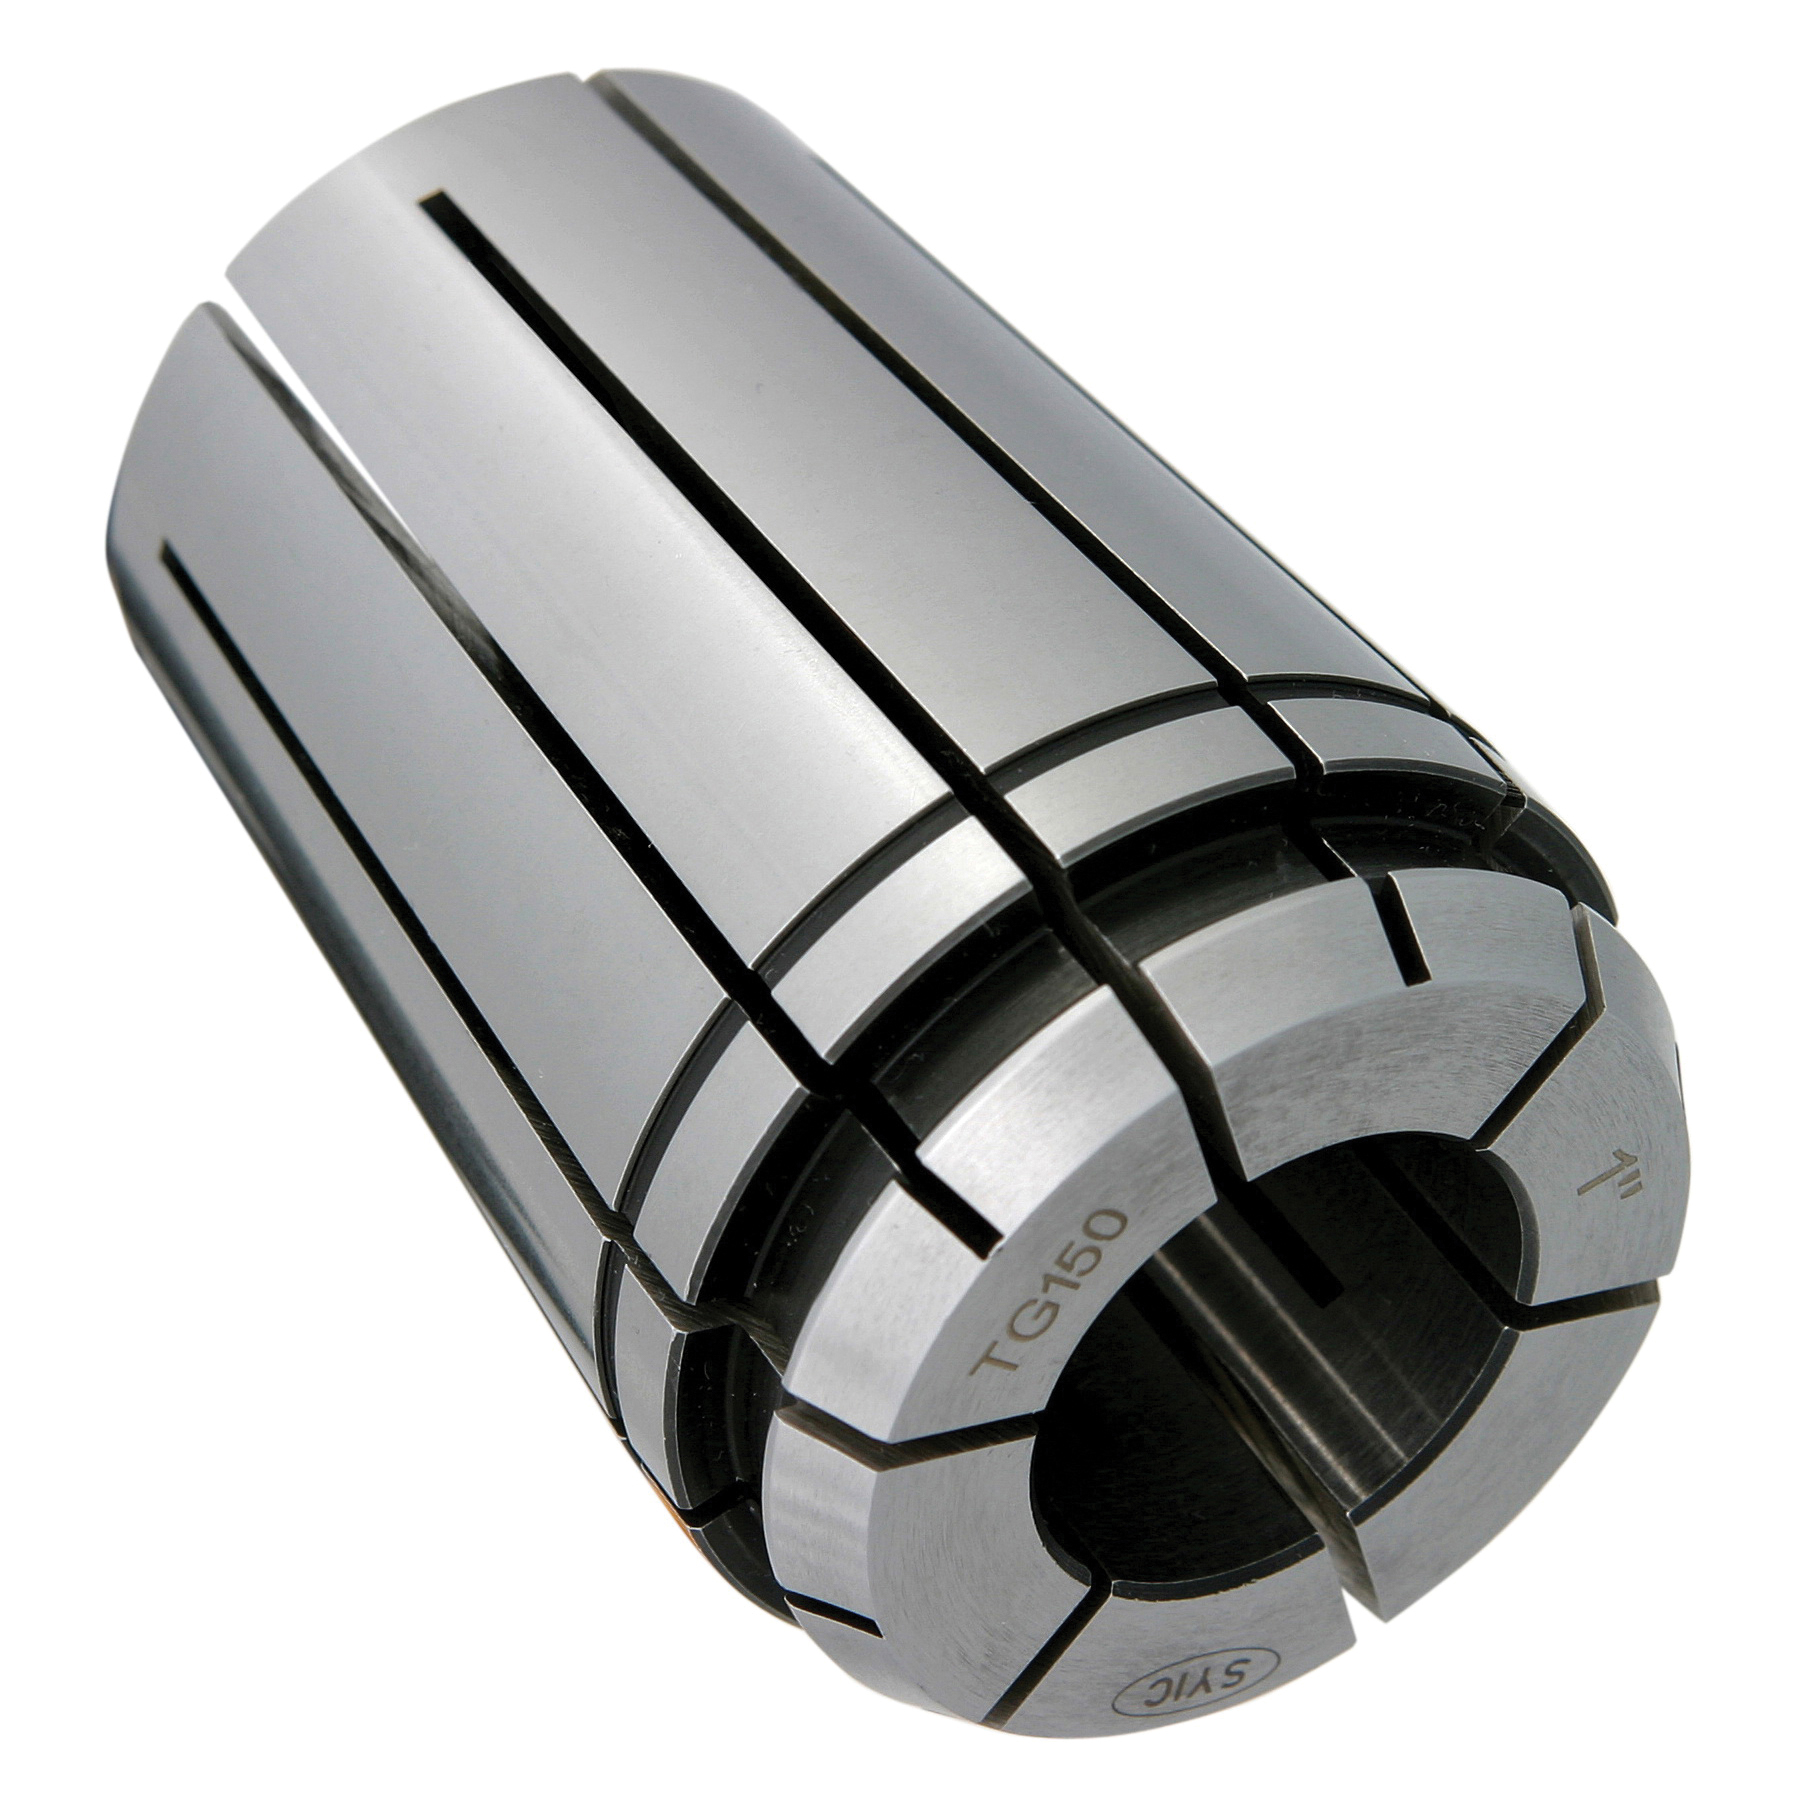 TG150 3/4" COLLET